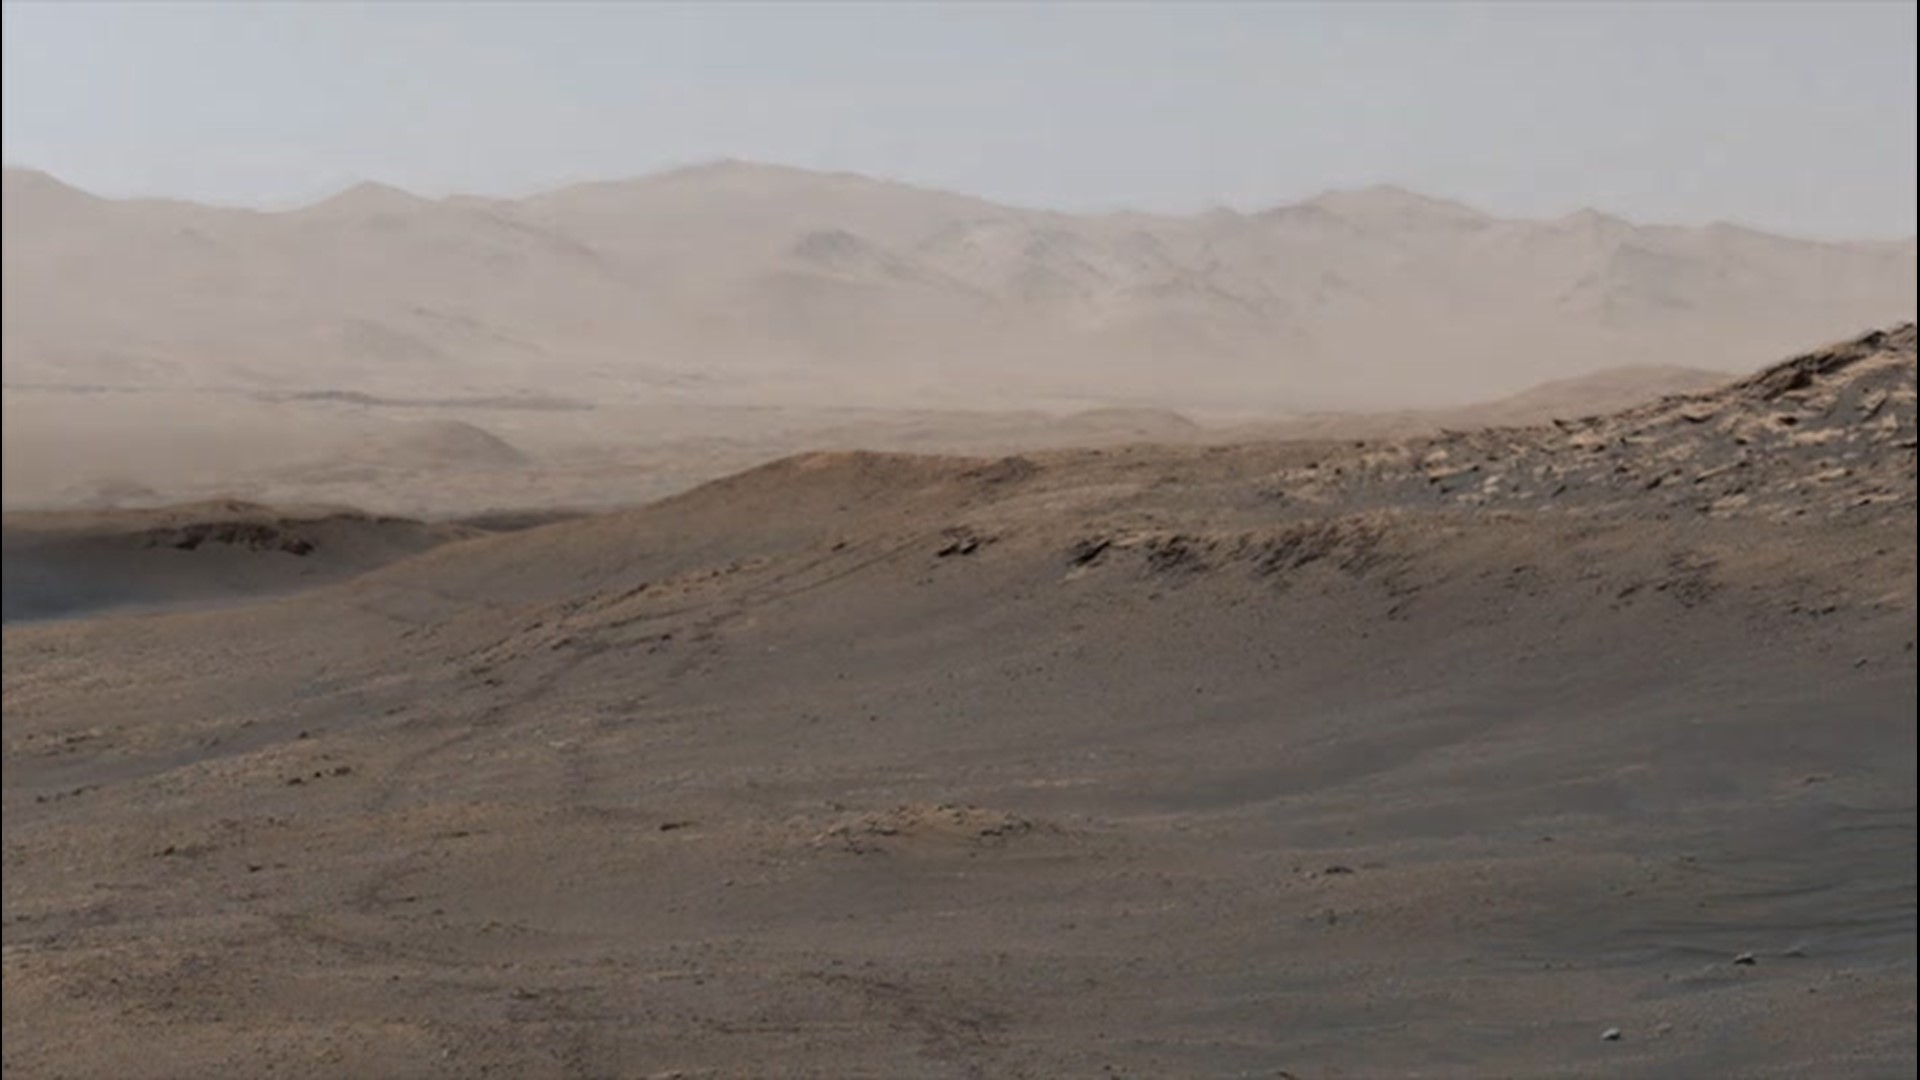 NASA says this is the 'largest and highest-resolution panorama' of the Martian landscape ever captured by the Curiosity Rover. It reveals the landscape of Mount Sharp, where the rover is currently located.